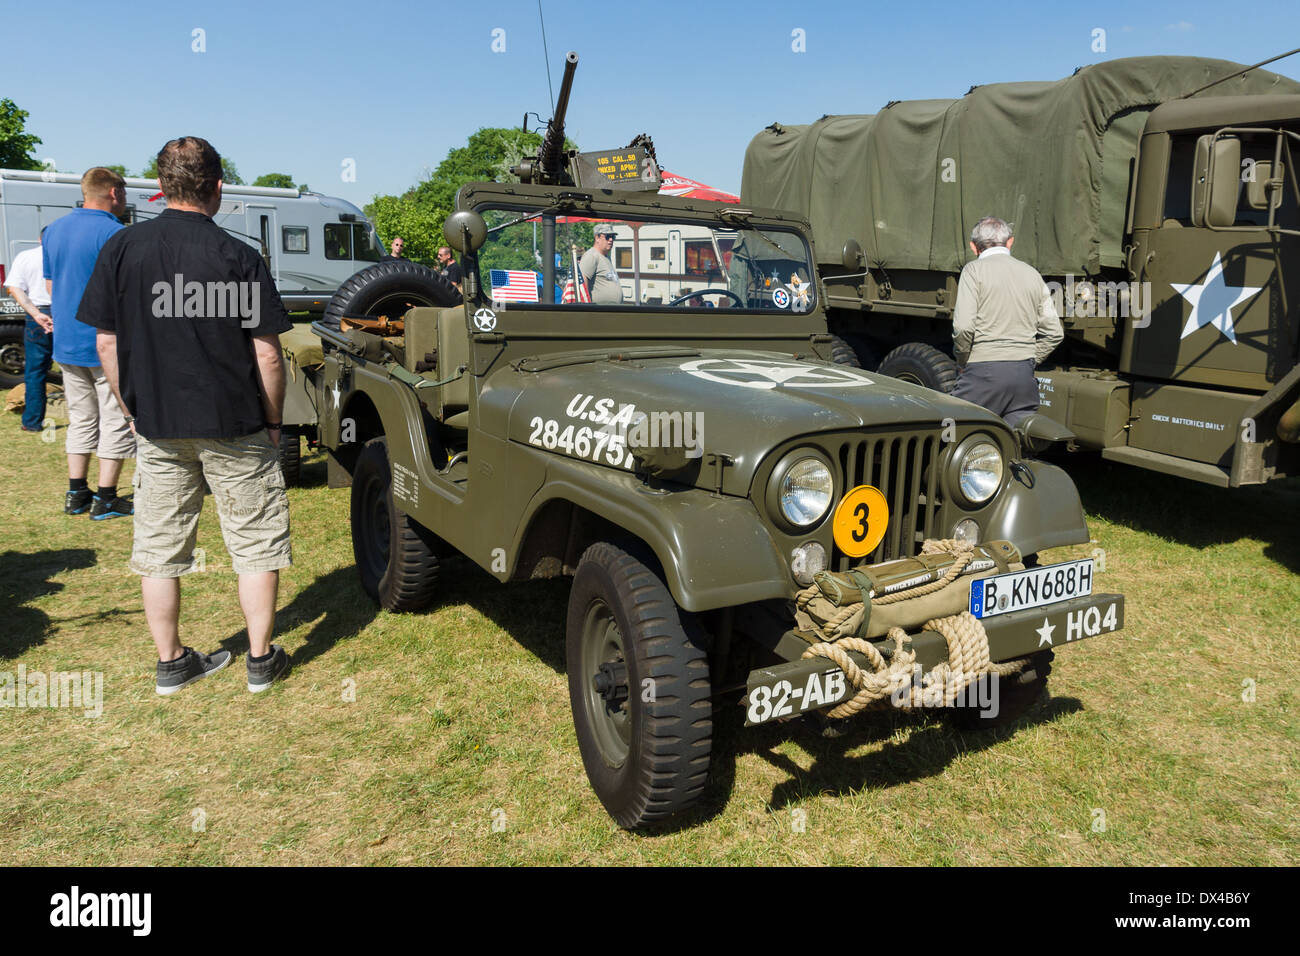 Military vehicles of the U.S. Army Jeep with 50 cal. Browning machine gun, Stock Photo